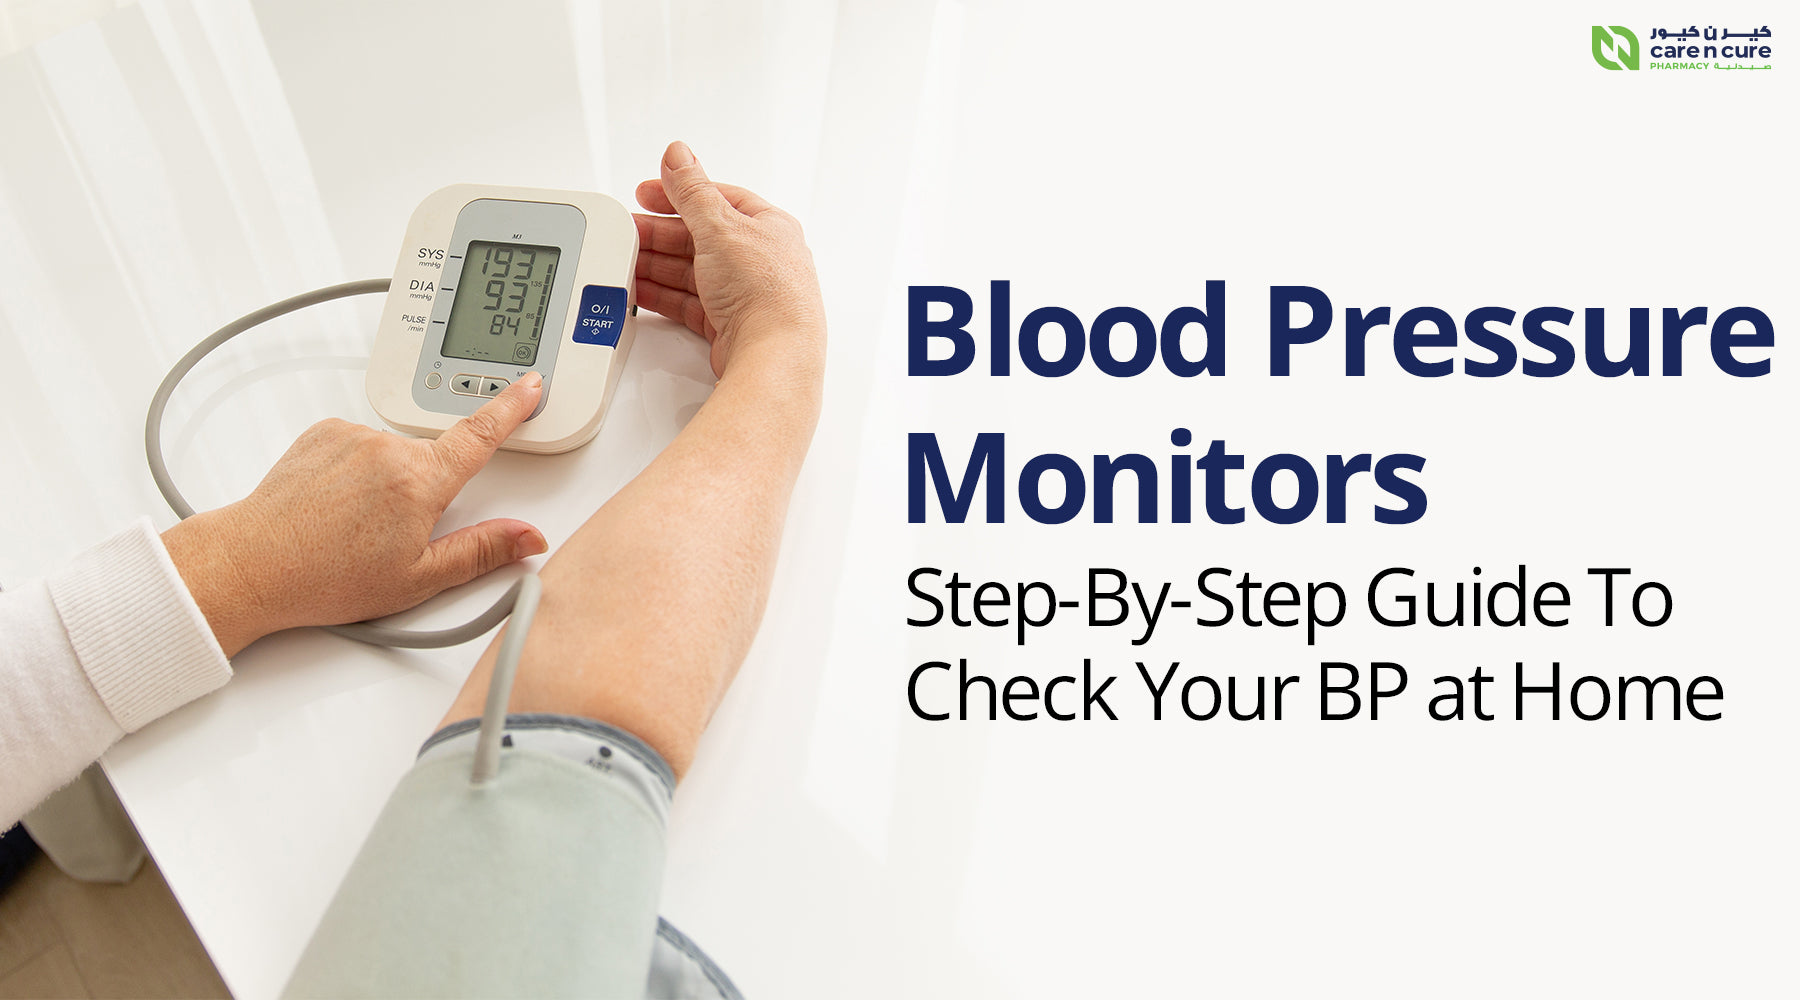 How to measure your blood pressure at home